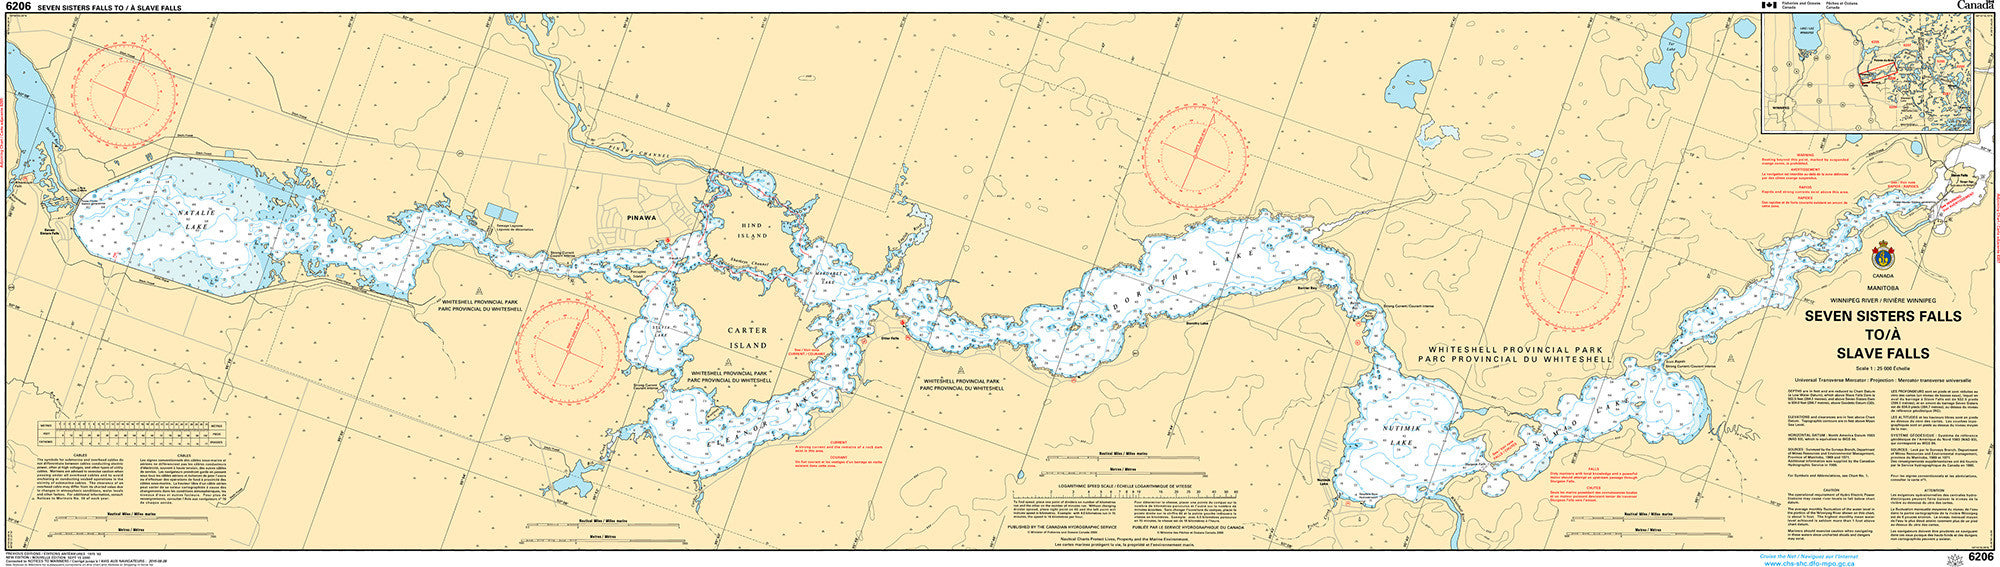 Canadian Hydrographic Service Nautical Chart CHS6206: Seven Sisters Falls to/à Slave Falls